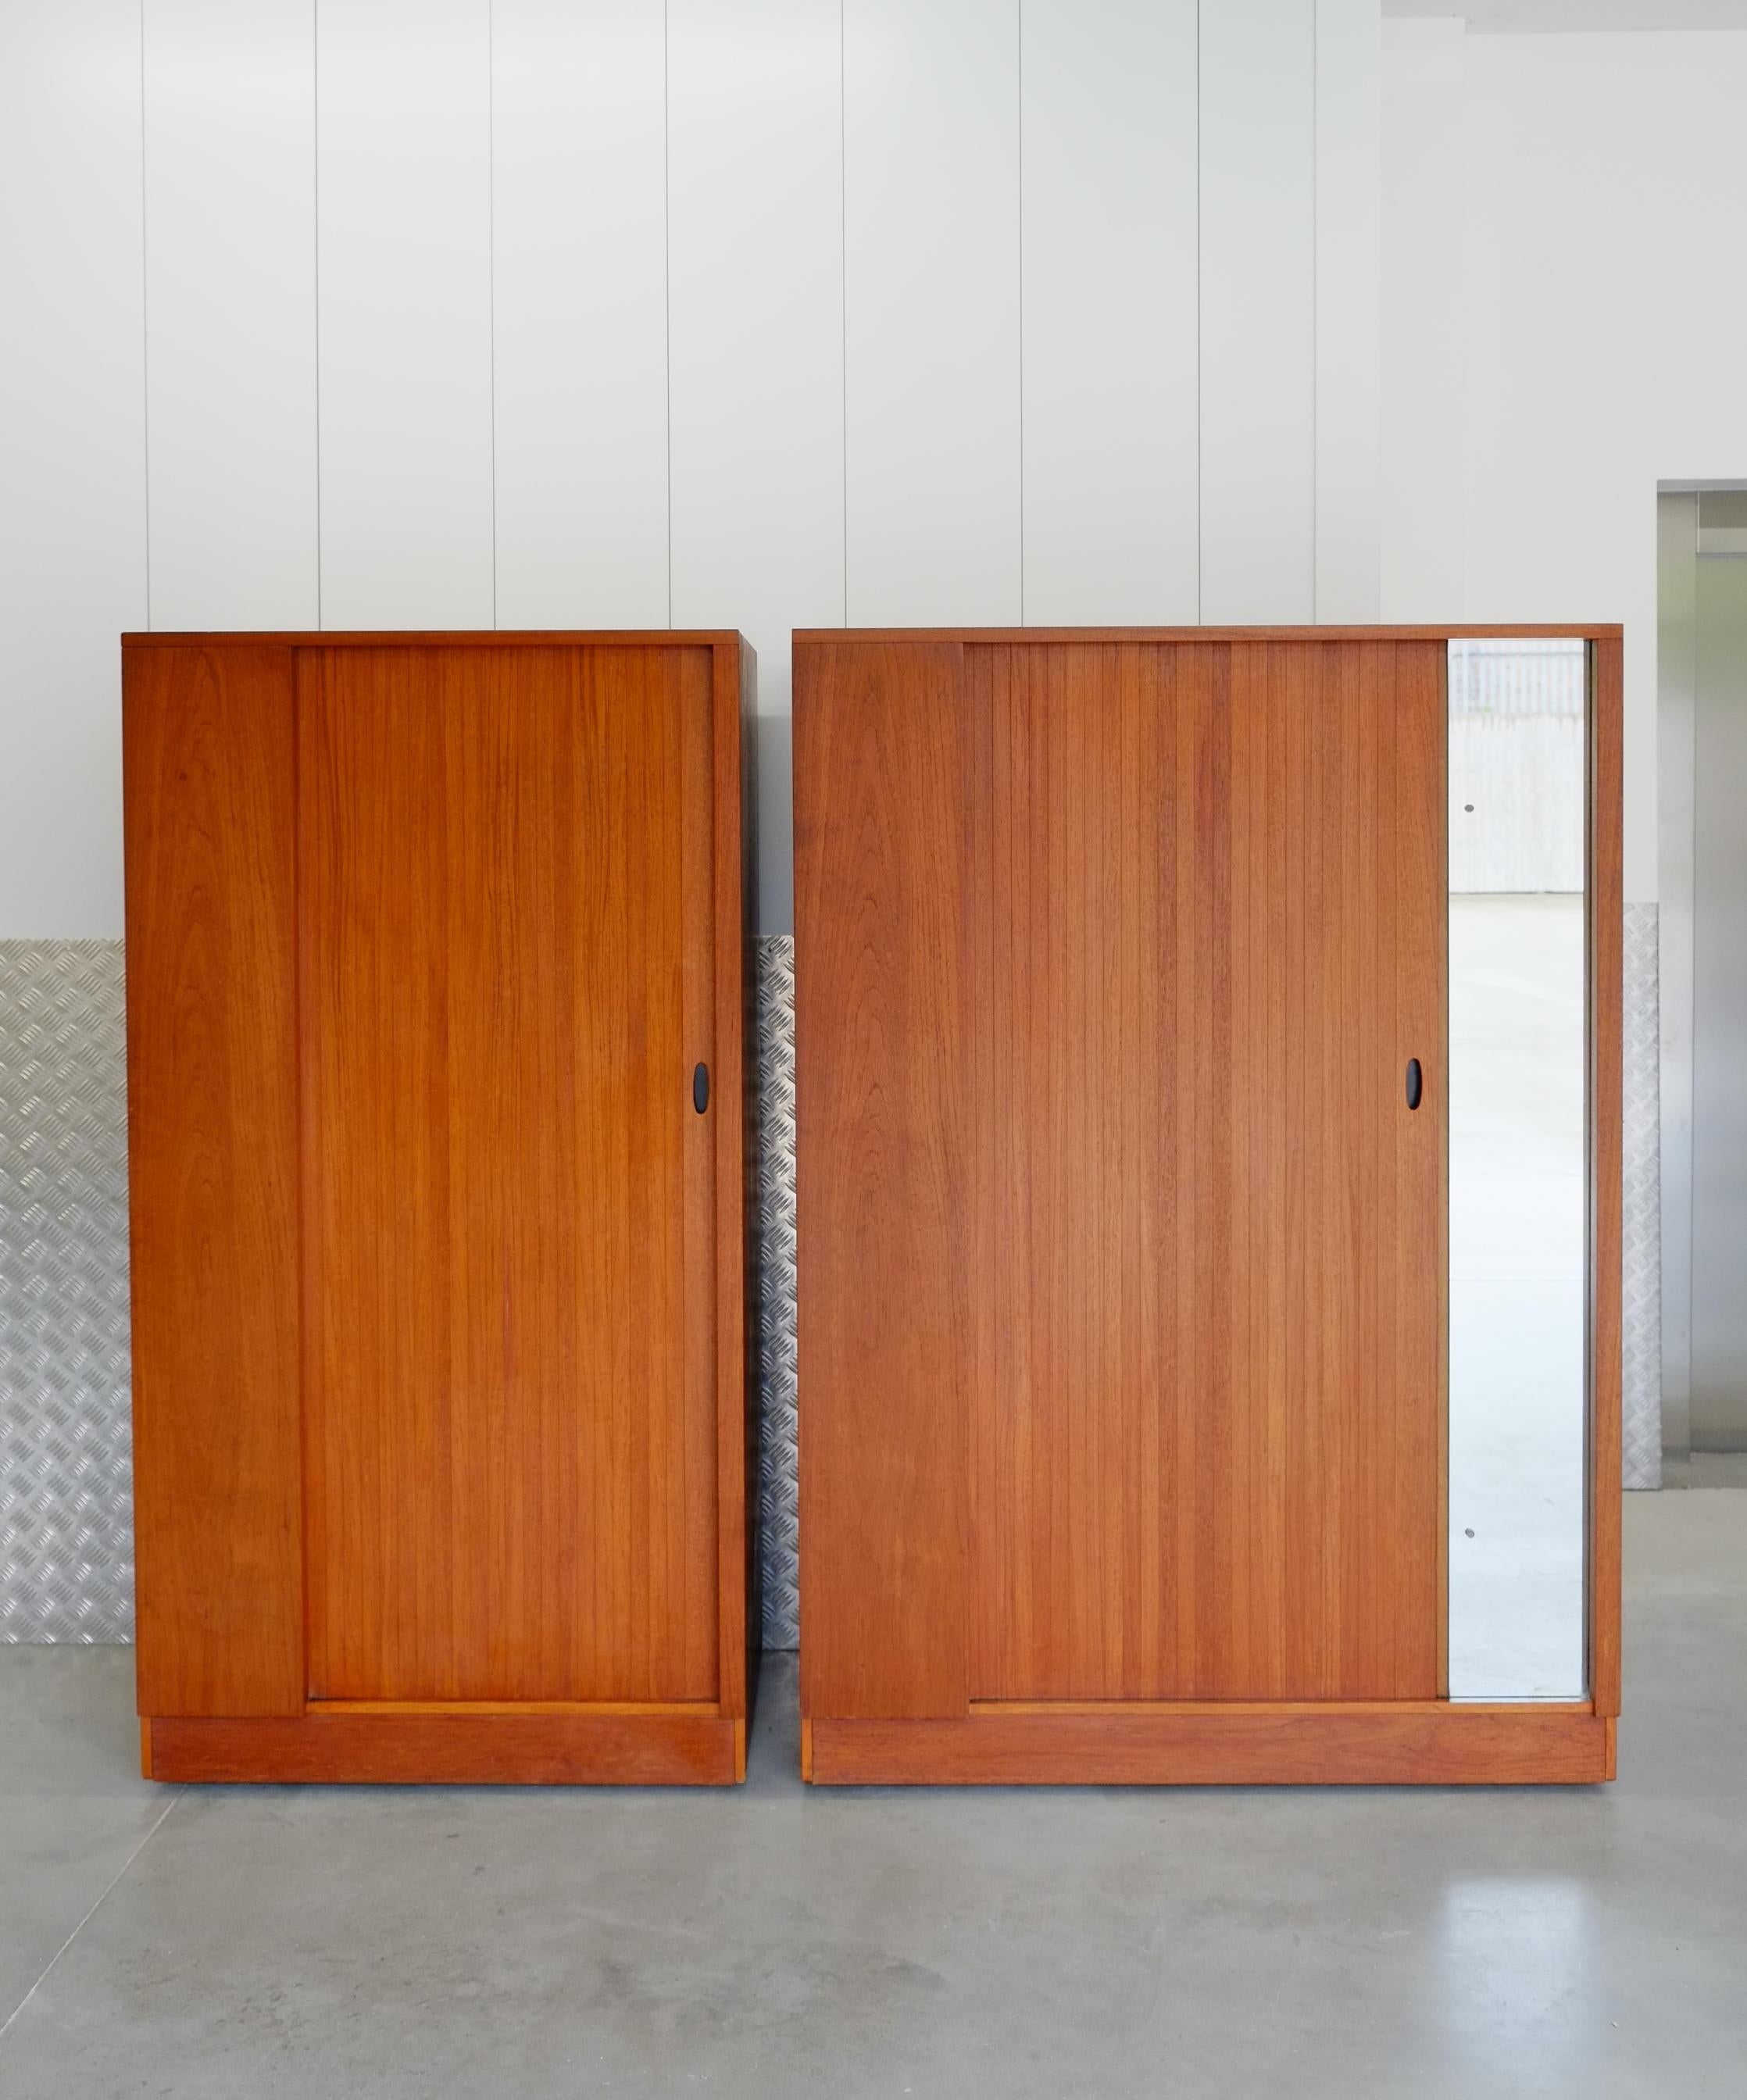 A beautiful mid century fitted wardrobe by Austinsuite. England C1960. We have a matching large wardrobe available on request. 

This piece is beautifully made with an elegant tambour door design and elegant fitted interior. The tambour door sets